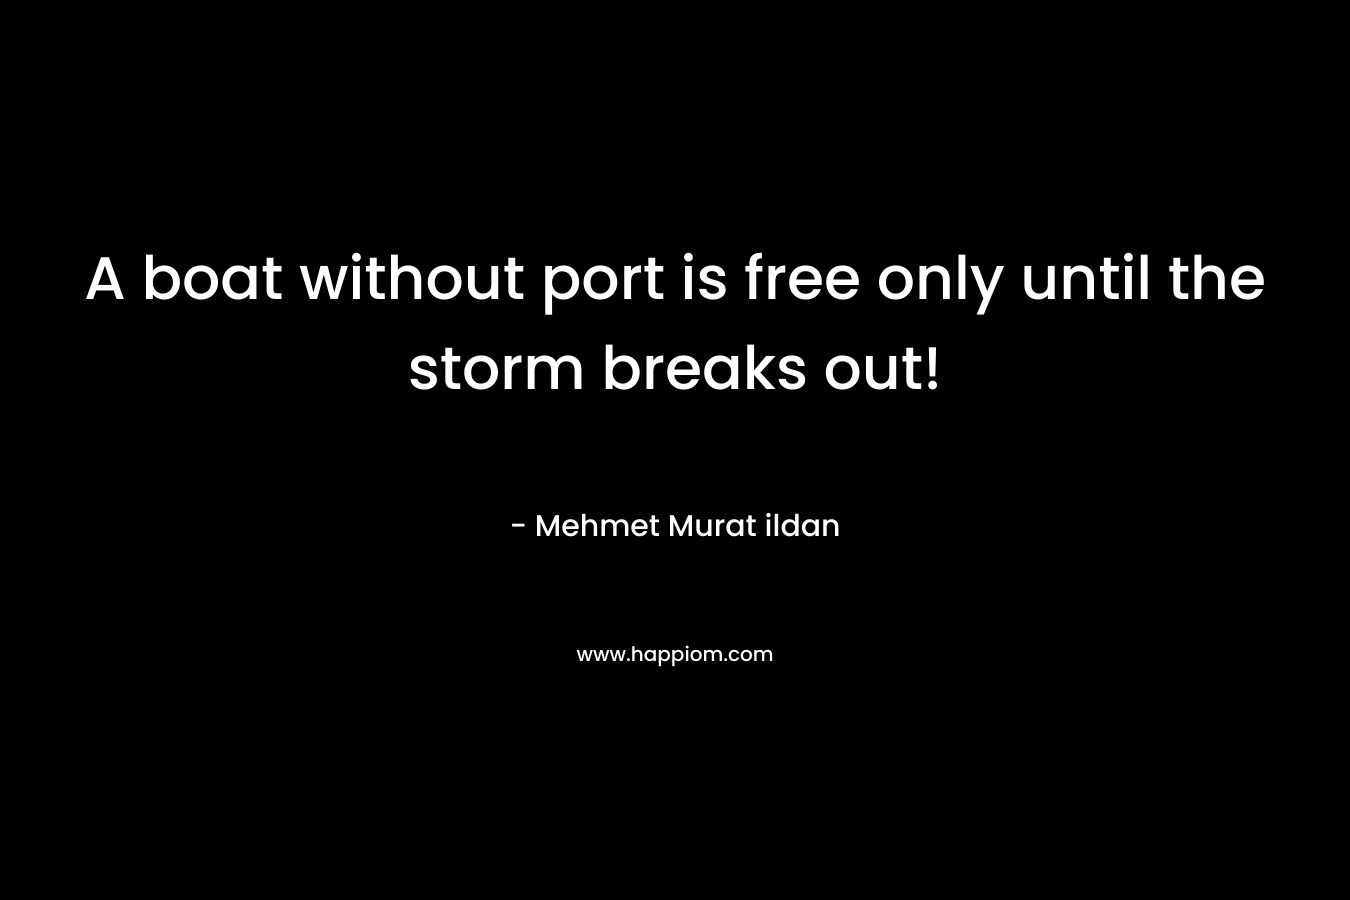 A boat without port is free only until the storm breaks out! – Mehmet Murat ildan